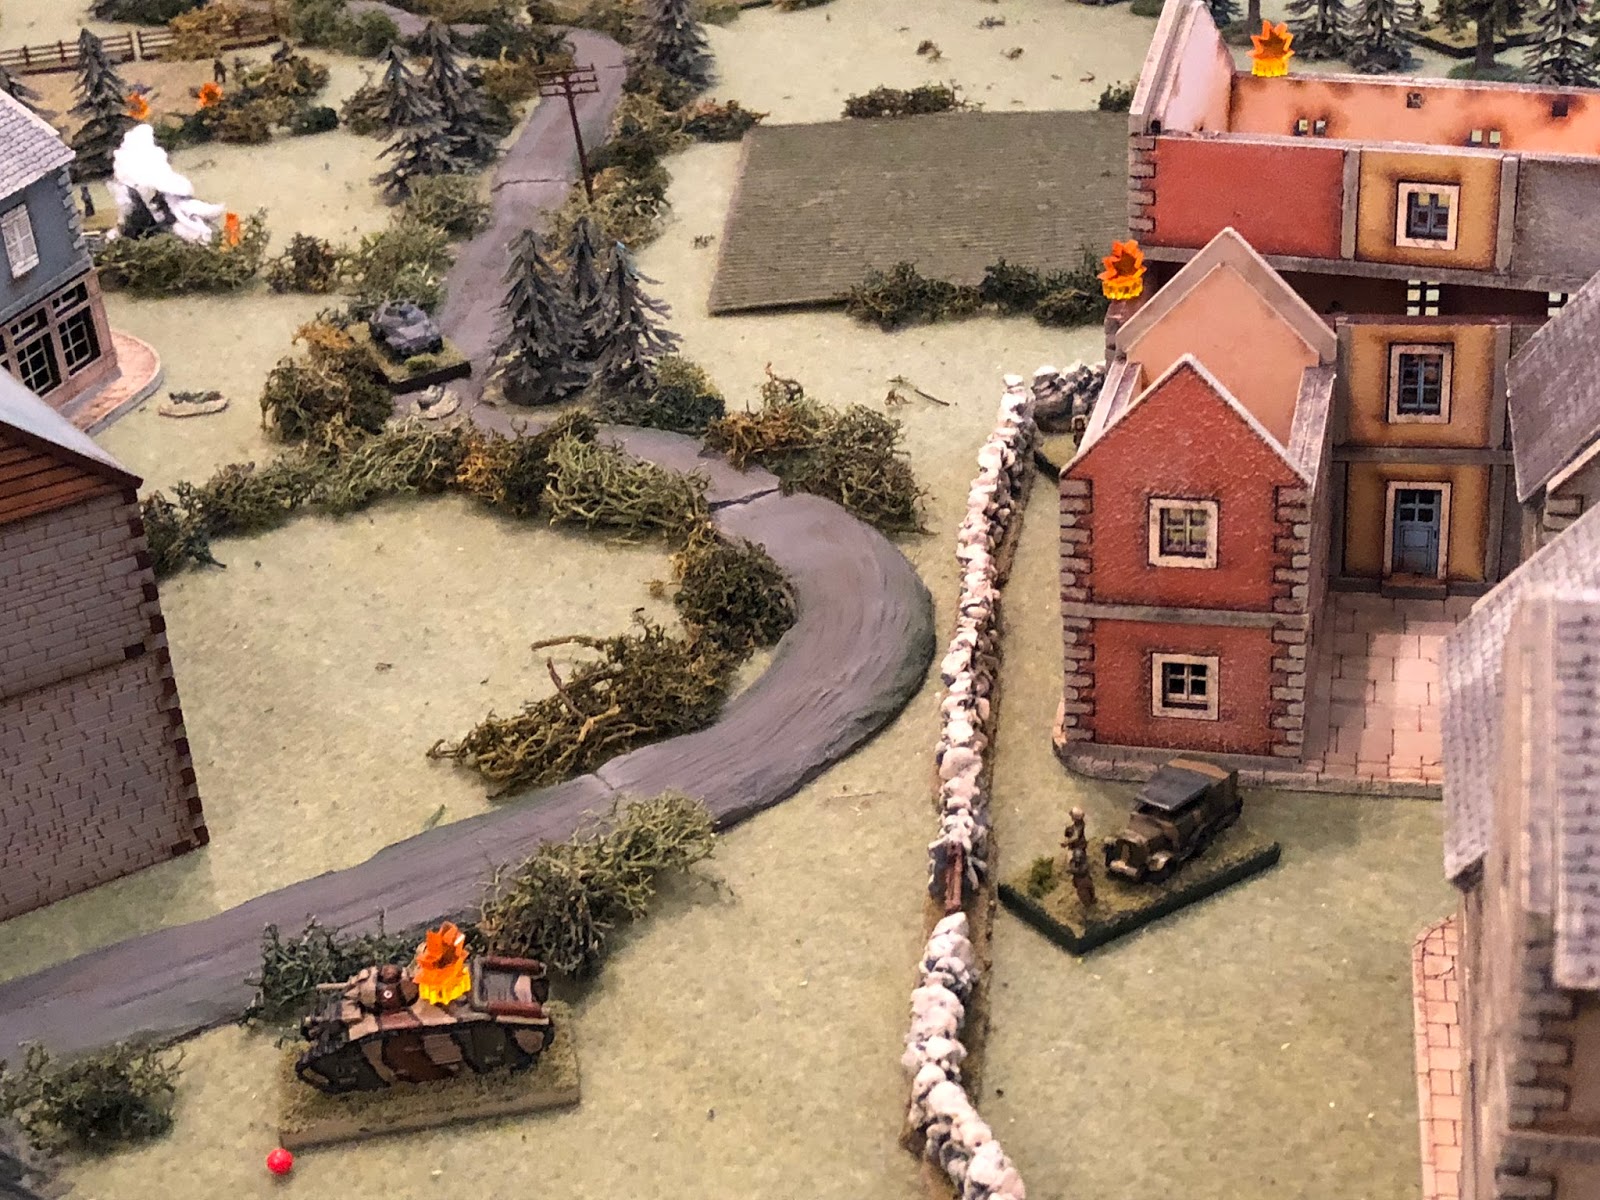  Major Renaut (bottom right) looks on as the German infantry are pounded (top left).&nbsp; 2nd Platoon and the machine gun (top right) are holding strong, the anti-tank gun (behind the buildings at right) is being re-posititioned; I just need to get 